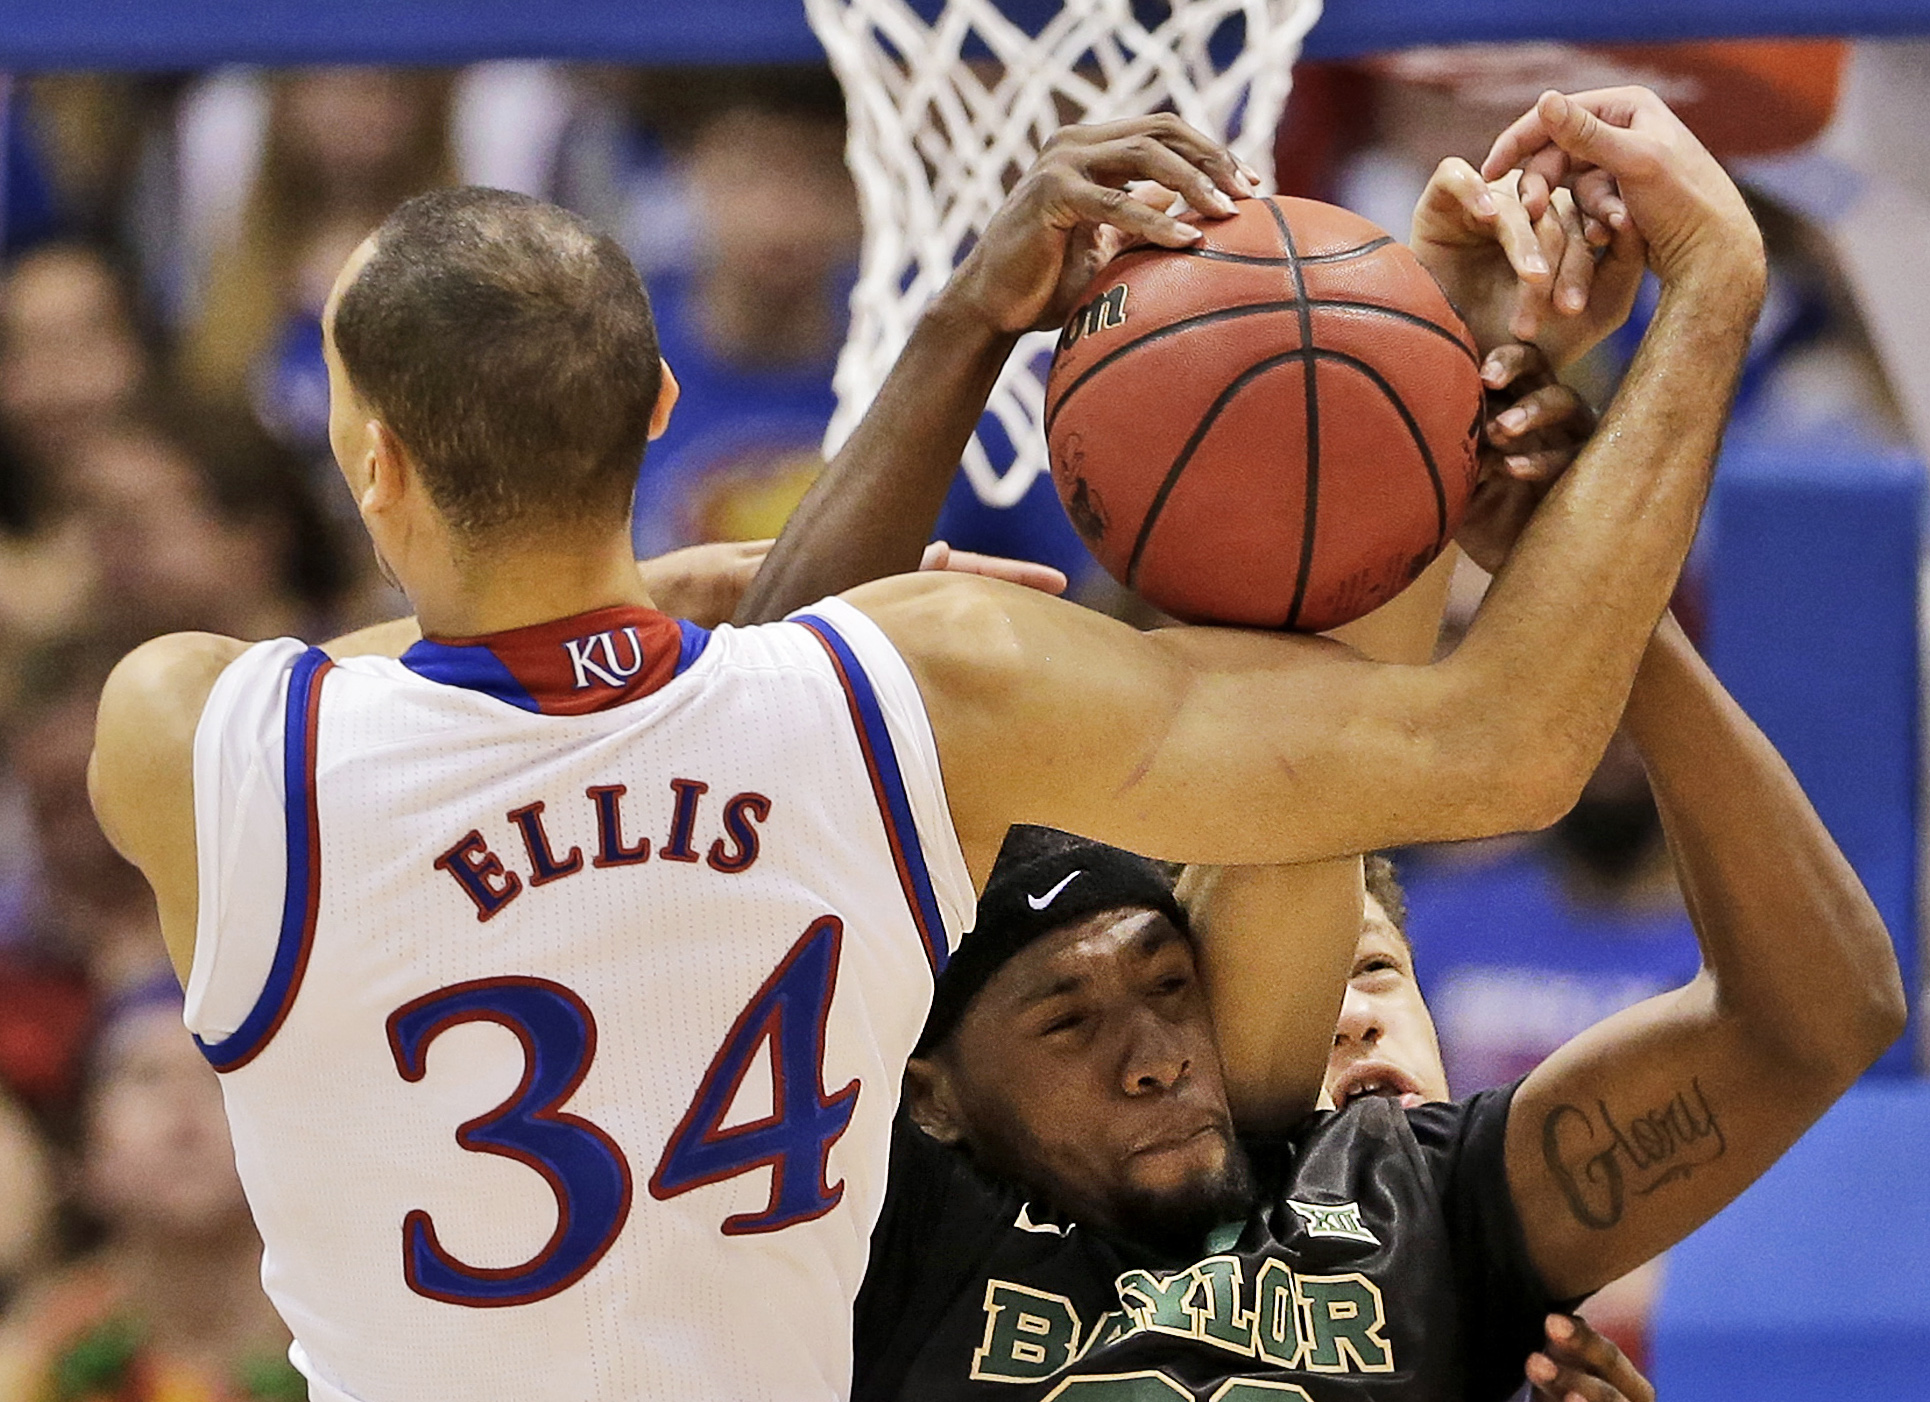 Kansas's Perry Ellis (34) and Royce O'Neale (00) battle for a rebound during the first half of an NCAA college basketball game Saturday, Feb. 14, 2015, in Lawrence, Kan. Associated Press